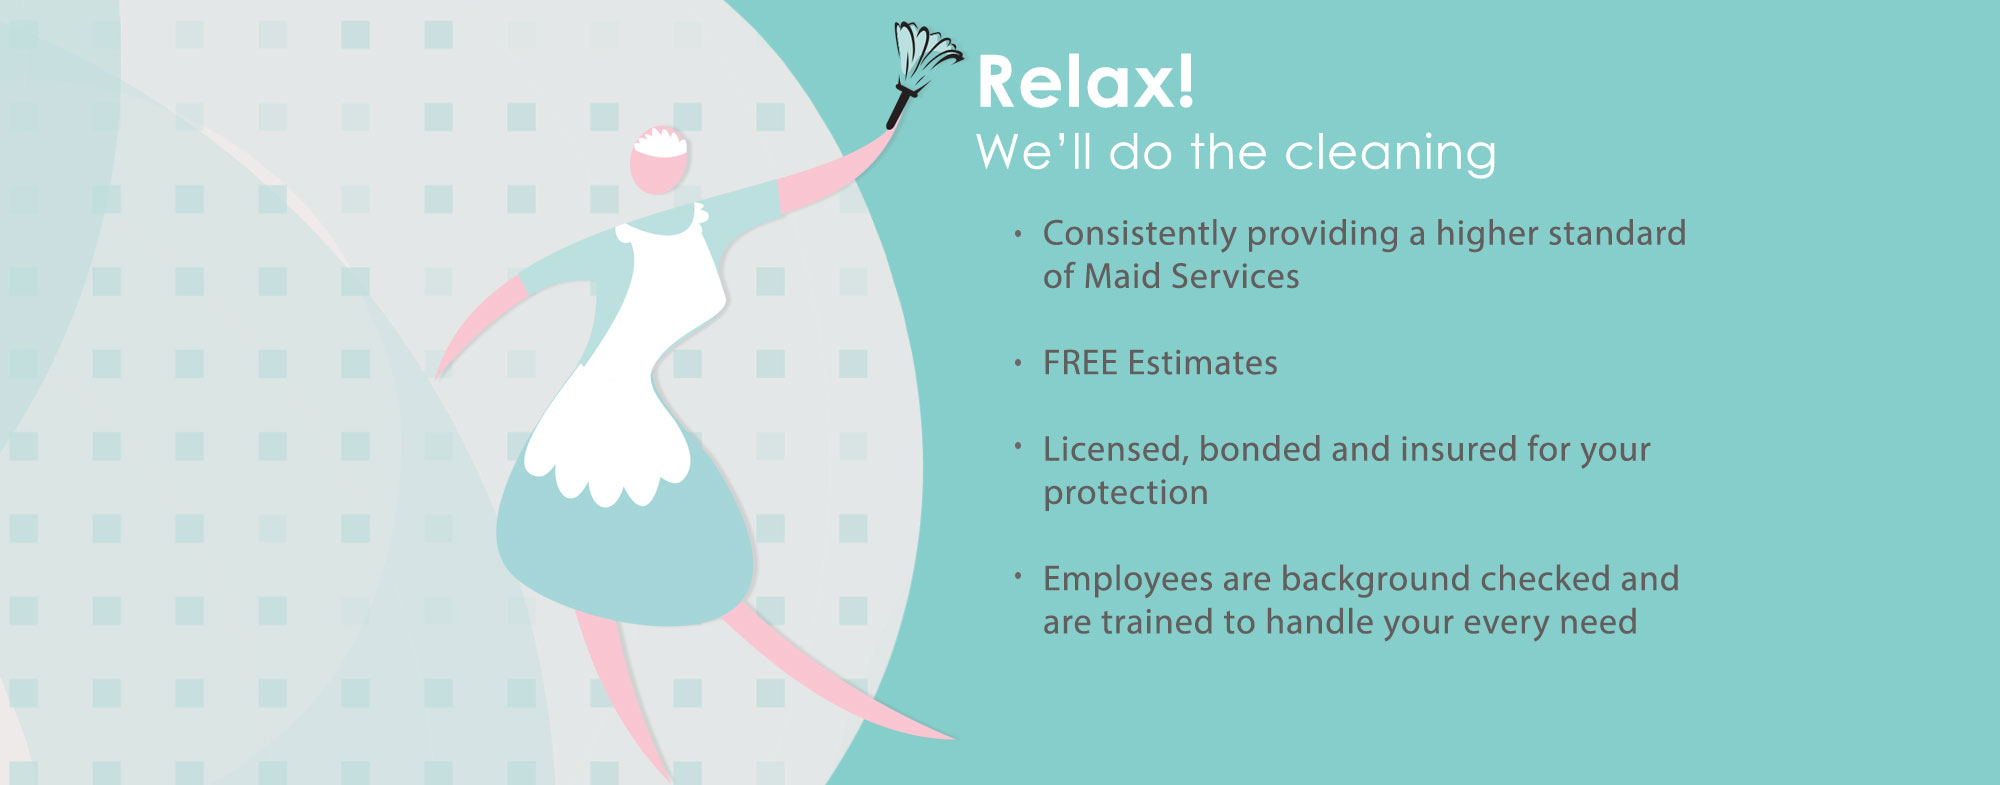 relax-we-do-the-cleaning-las-vegas